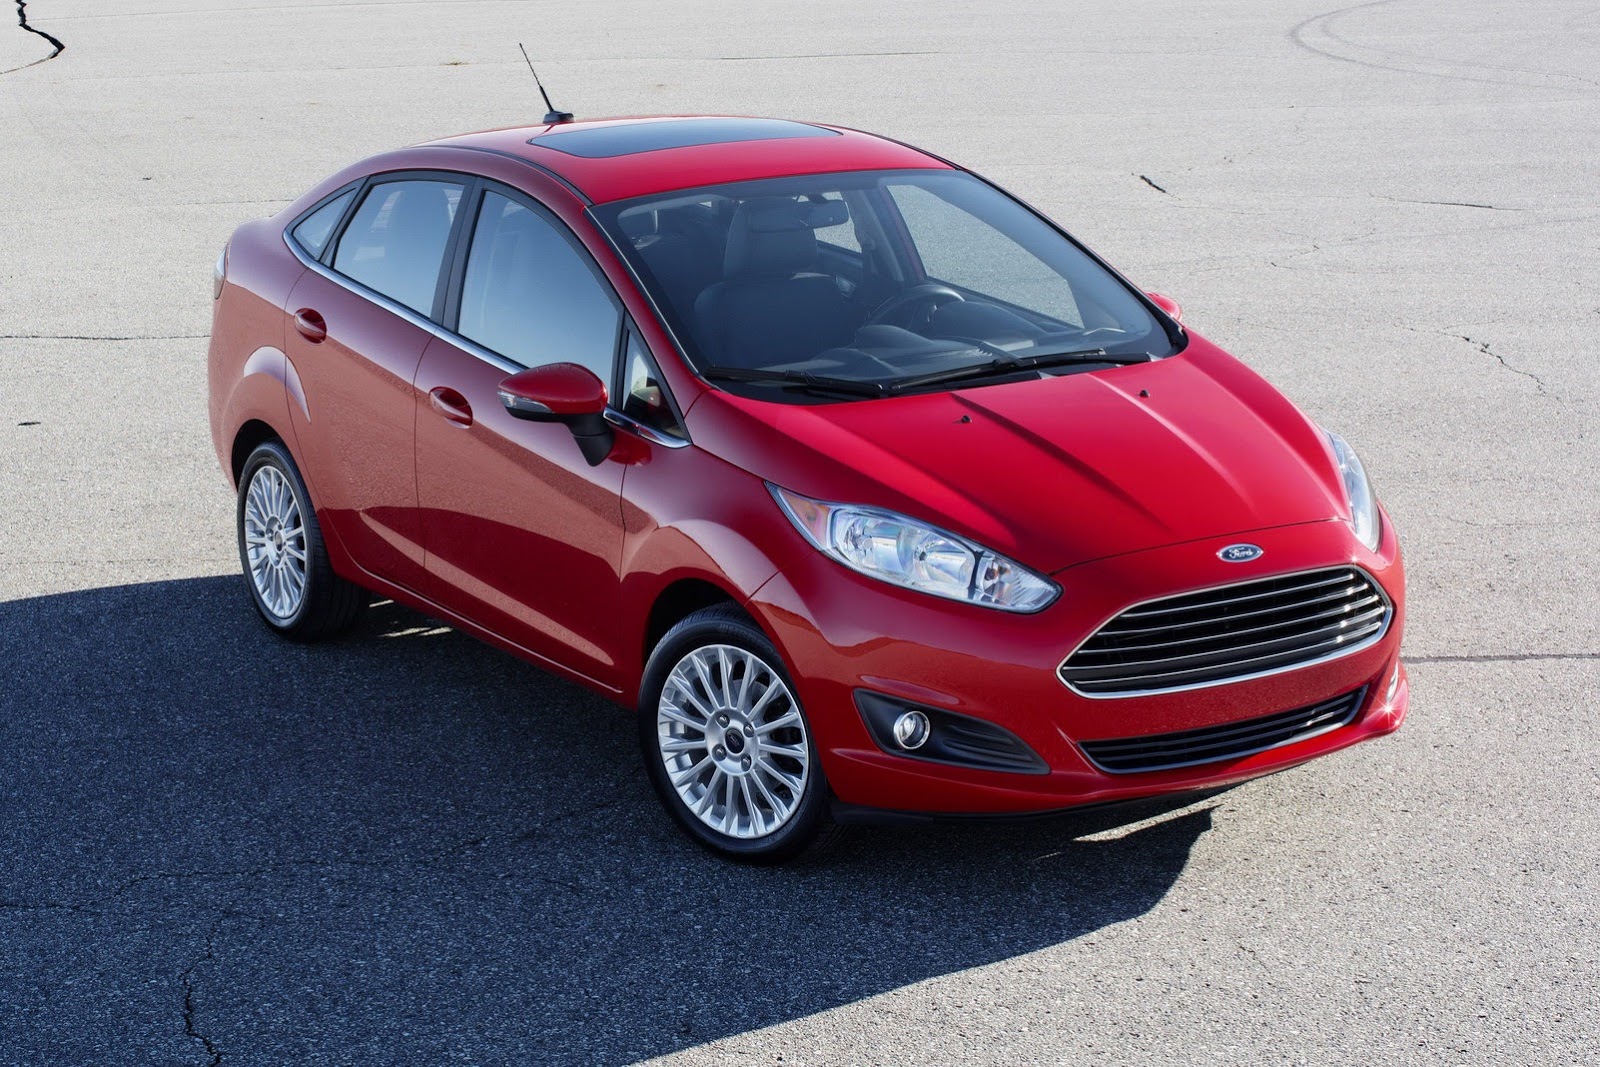 Ford Fiesta Saloon Facelift Photo Gallery Autocar India